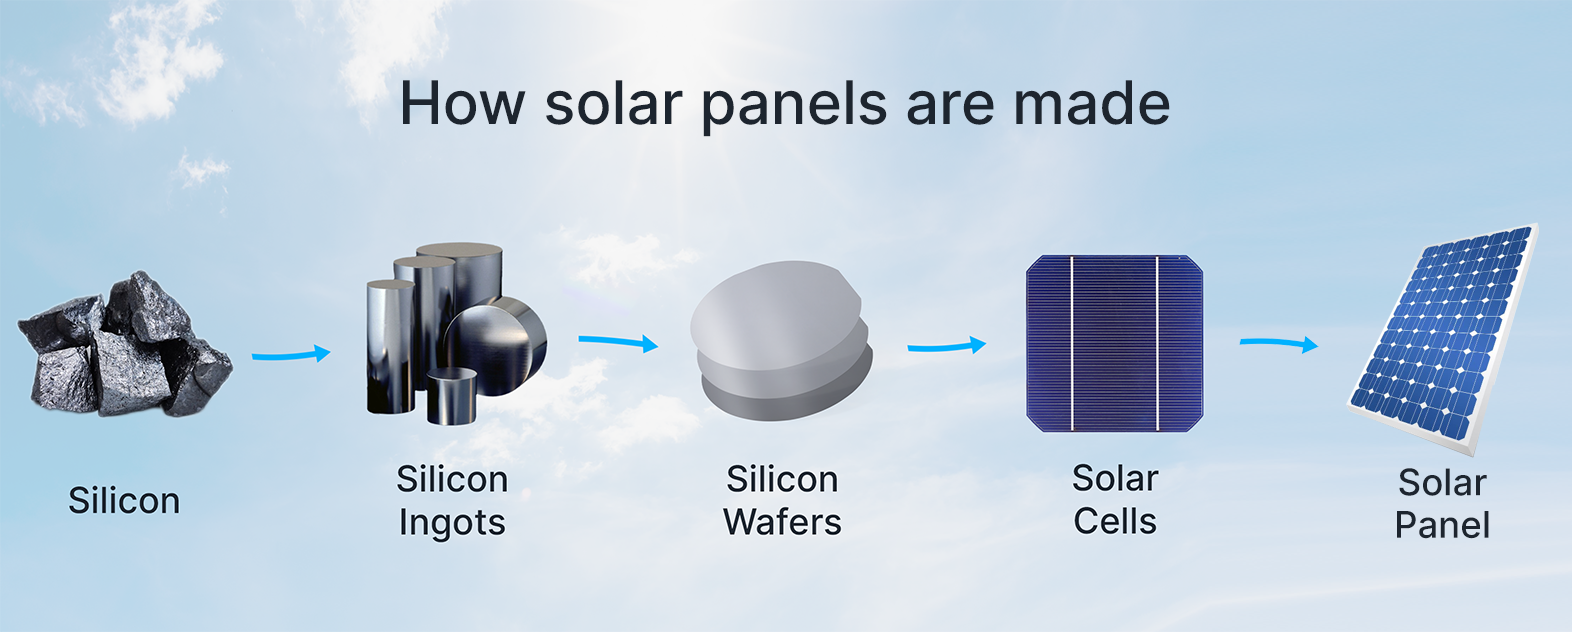 Graphic showing materials used in making solar panels. Silicon is turned into silicon ingots which are sliced into silicon wafers. Wafers are then made into solar cells that are wired together in a solar panel. 